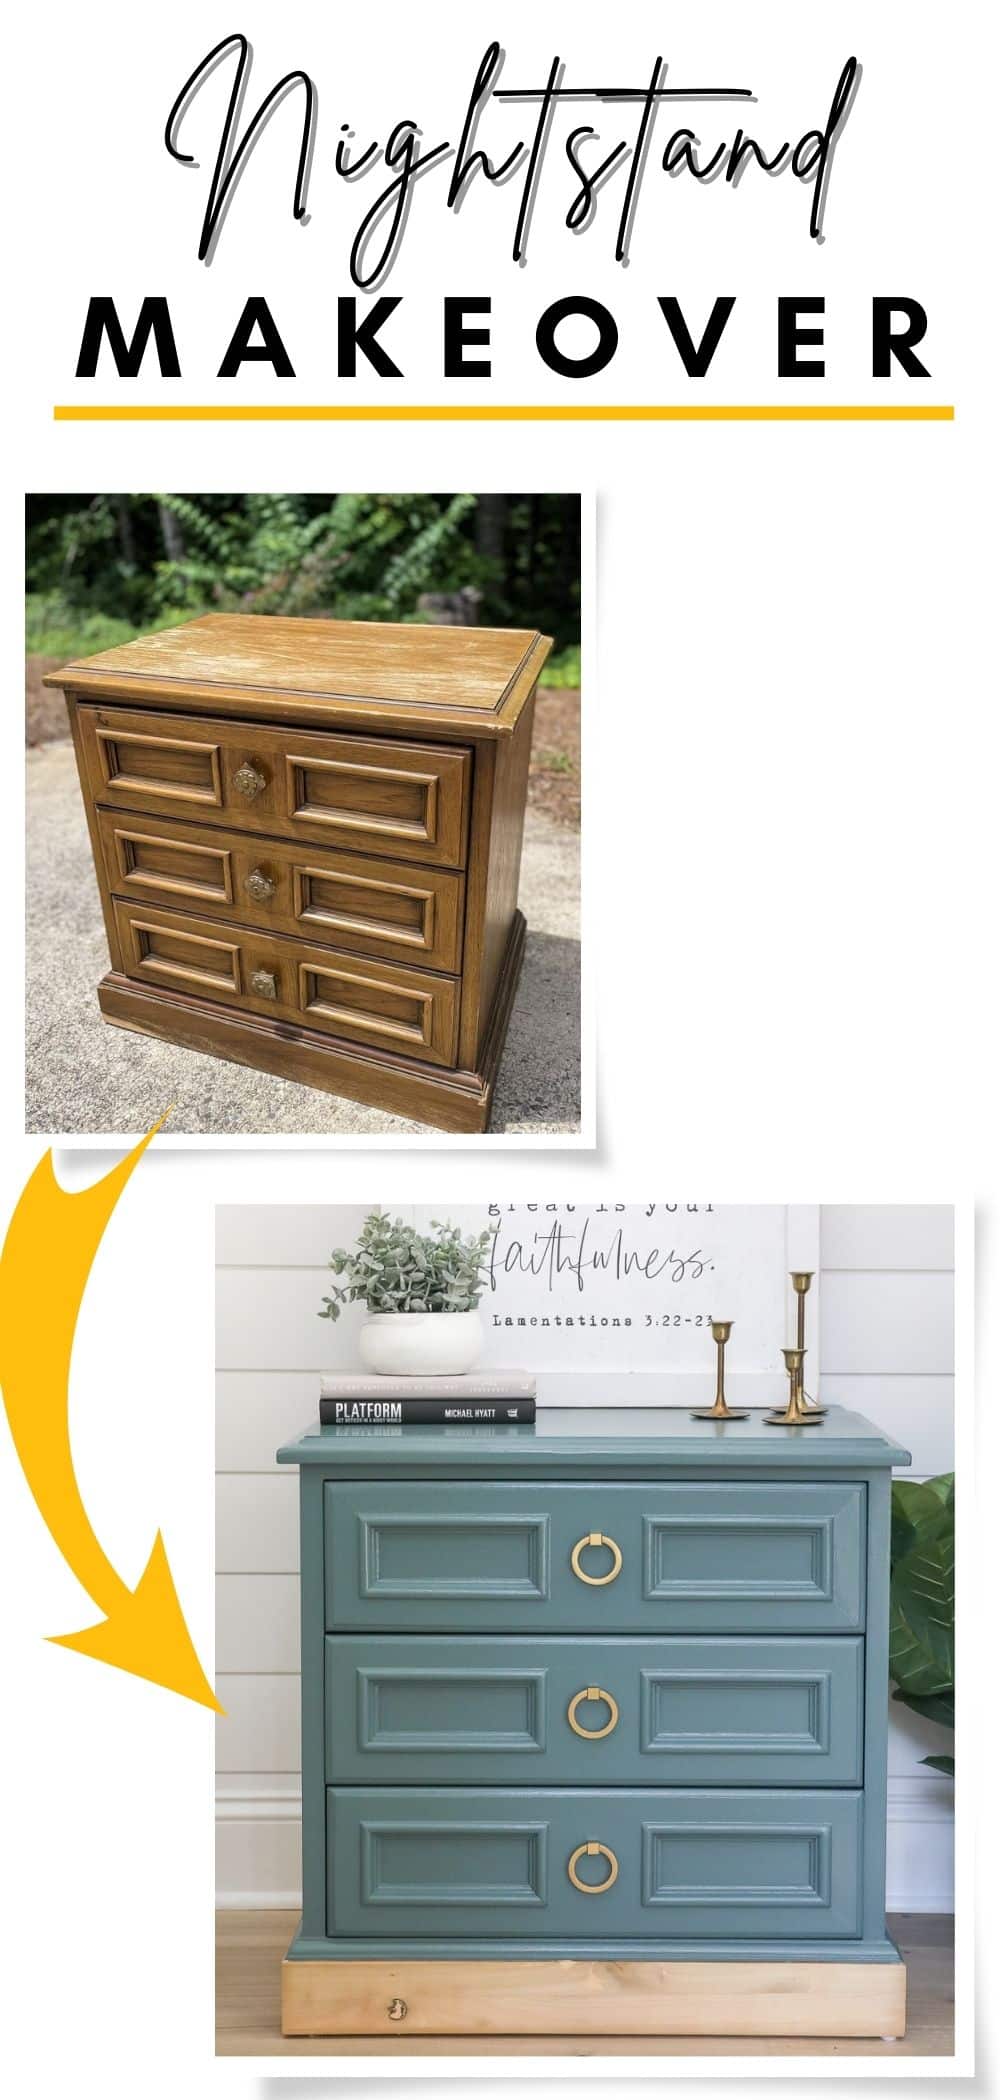 collage image of before and after nightstand